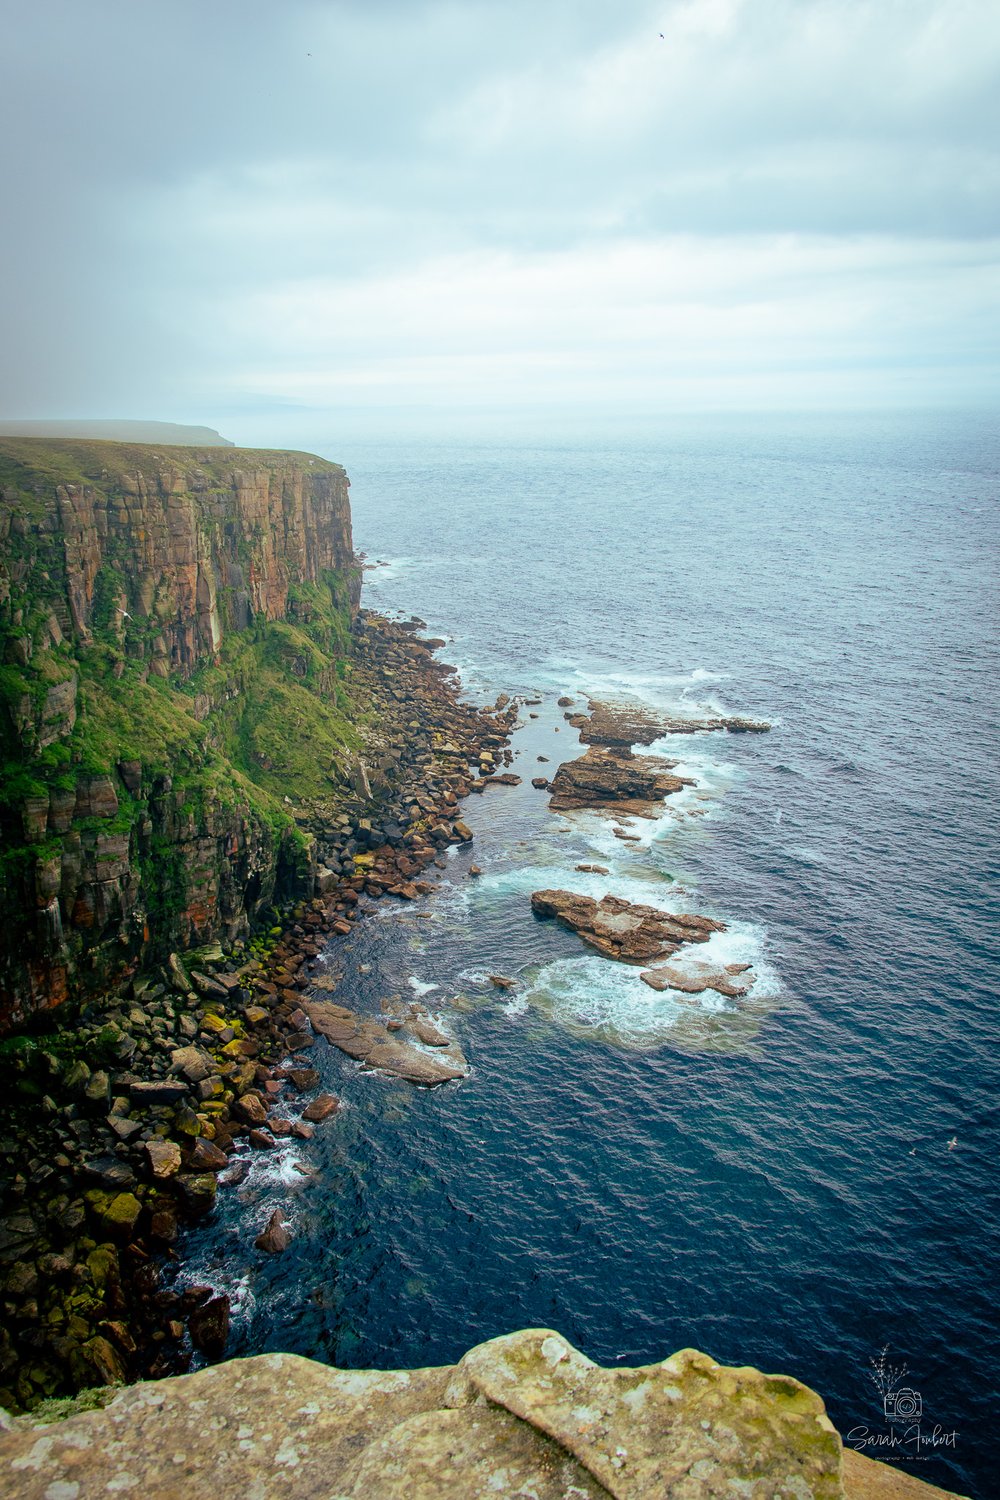 The view from Dunnet Head